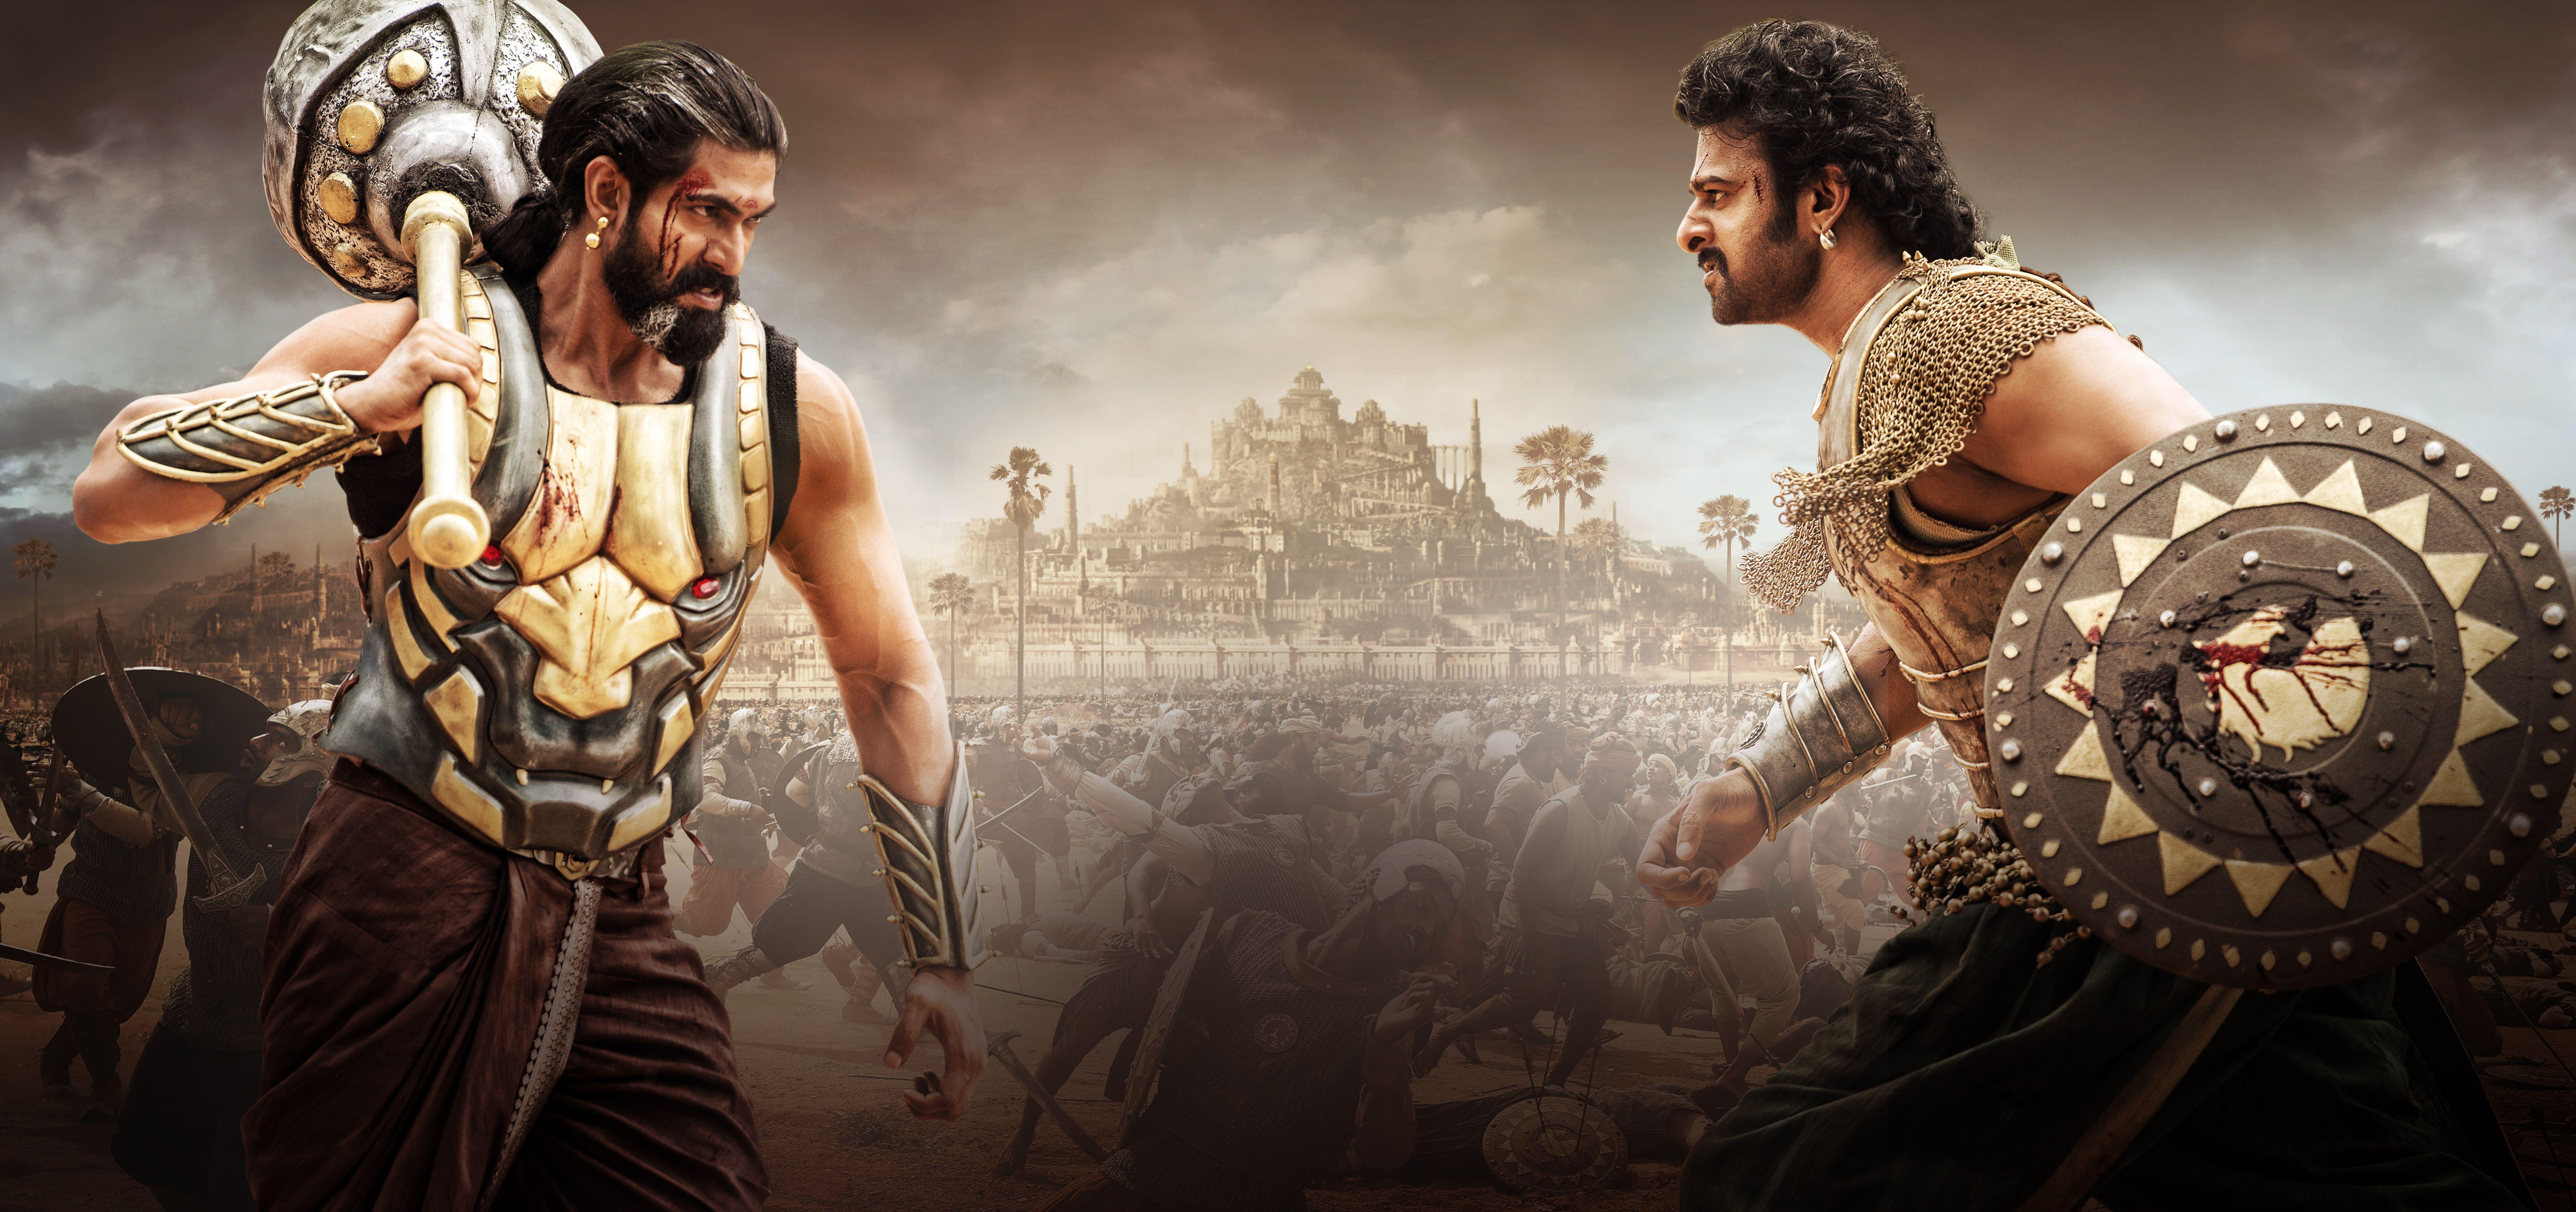 Prabhas Face Closeup With Six Pack Body In Baahubali The Beginning